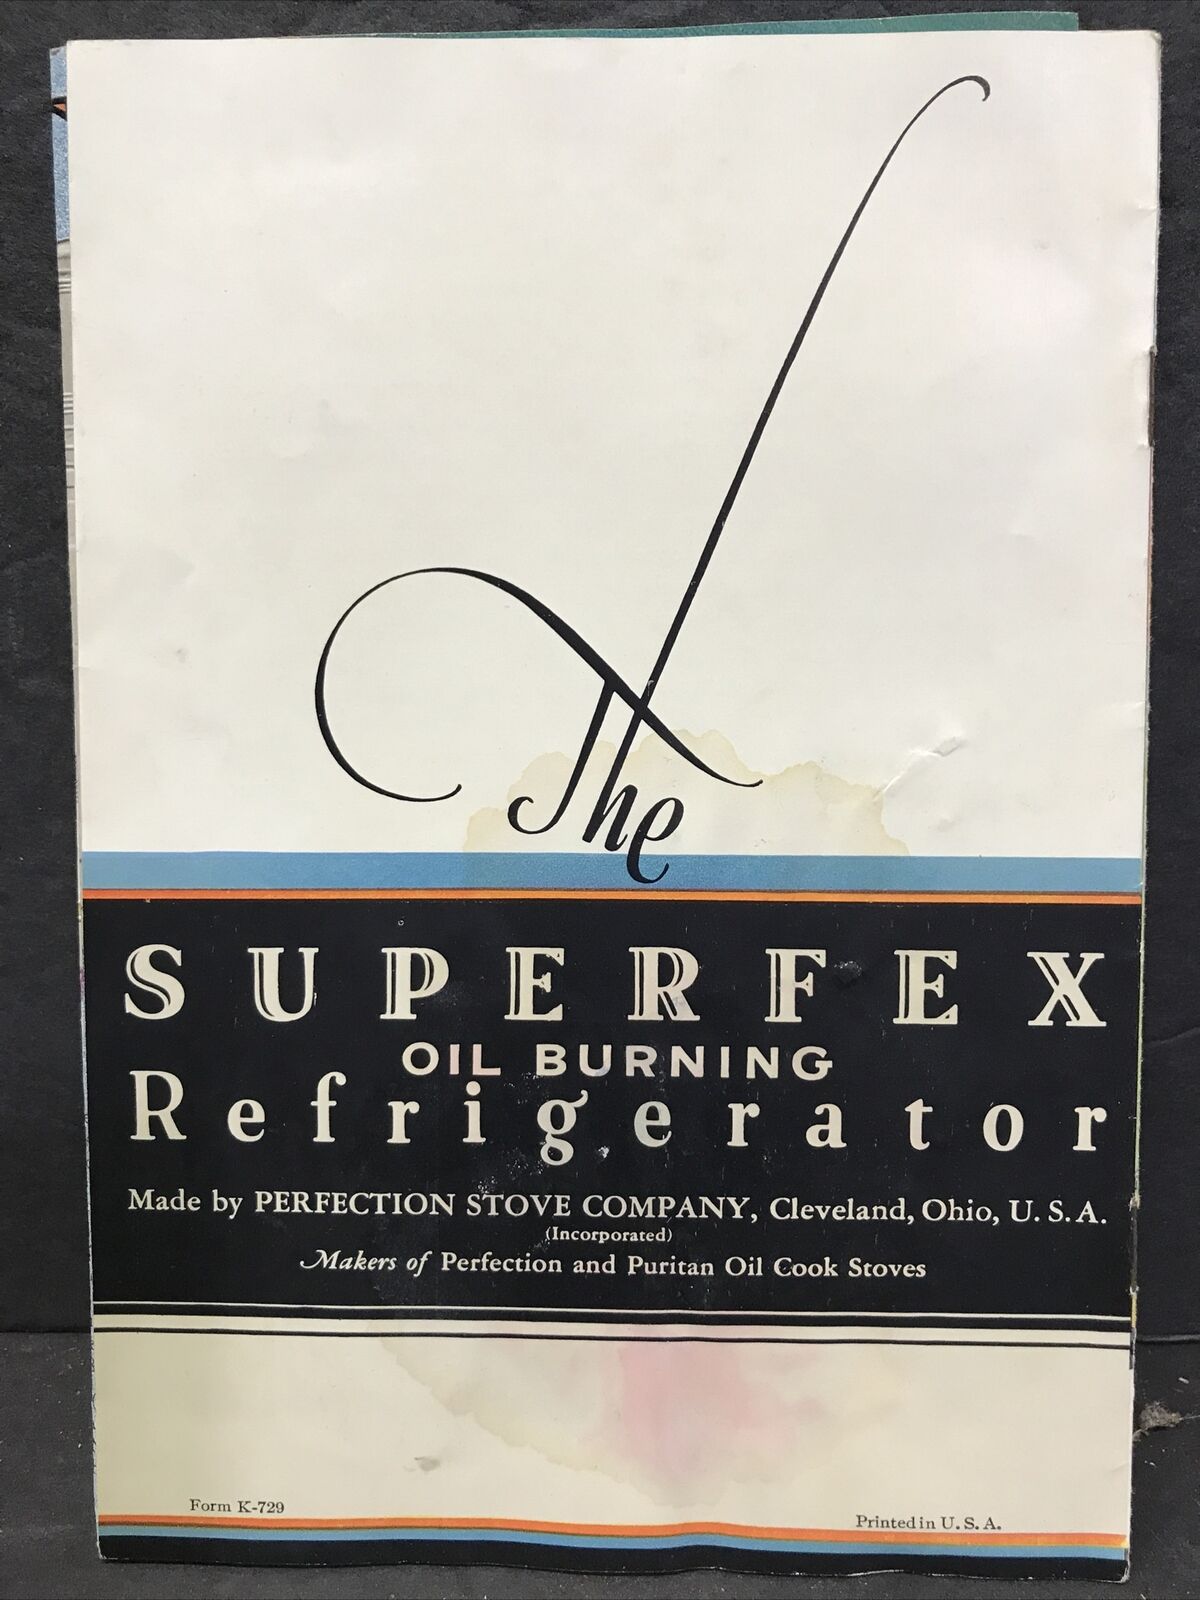 Superfex Oil Burning Refrigerator Booklet Perfection Stove Co & Puritan Oil